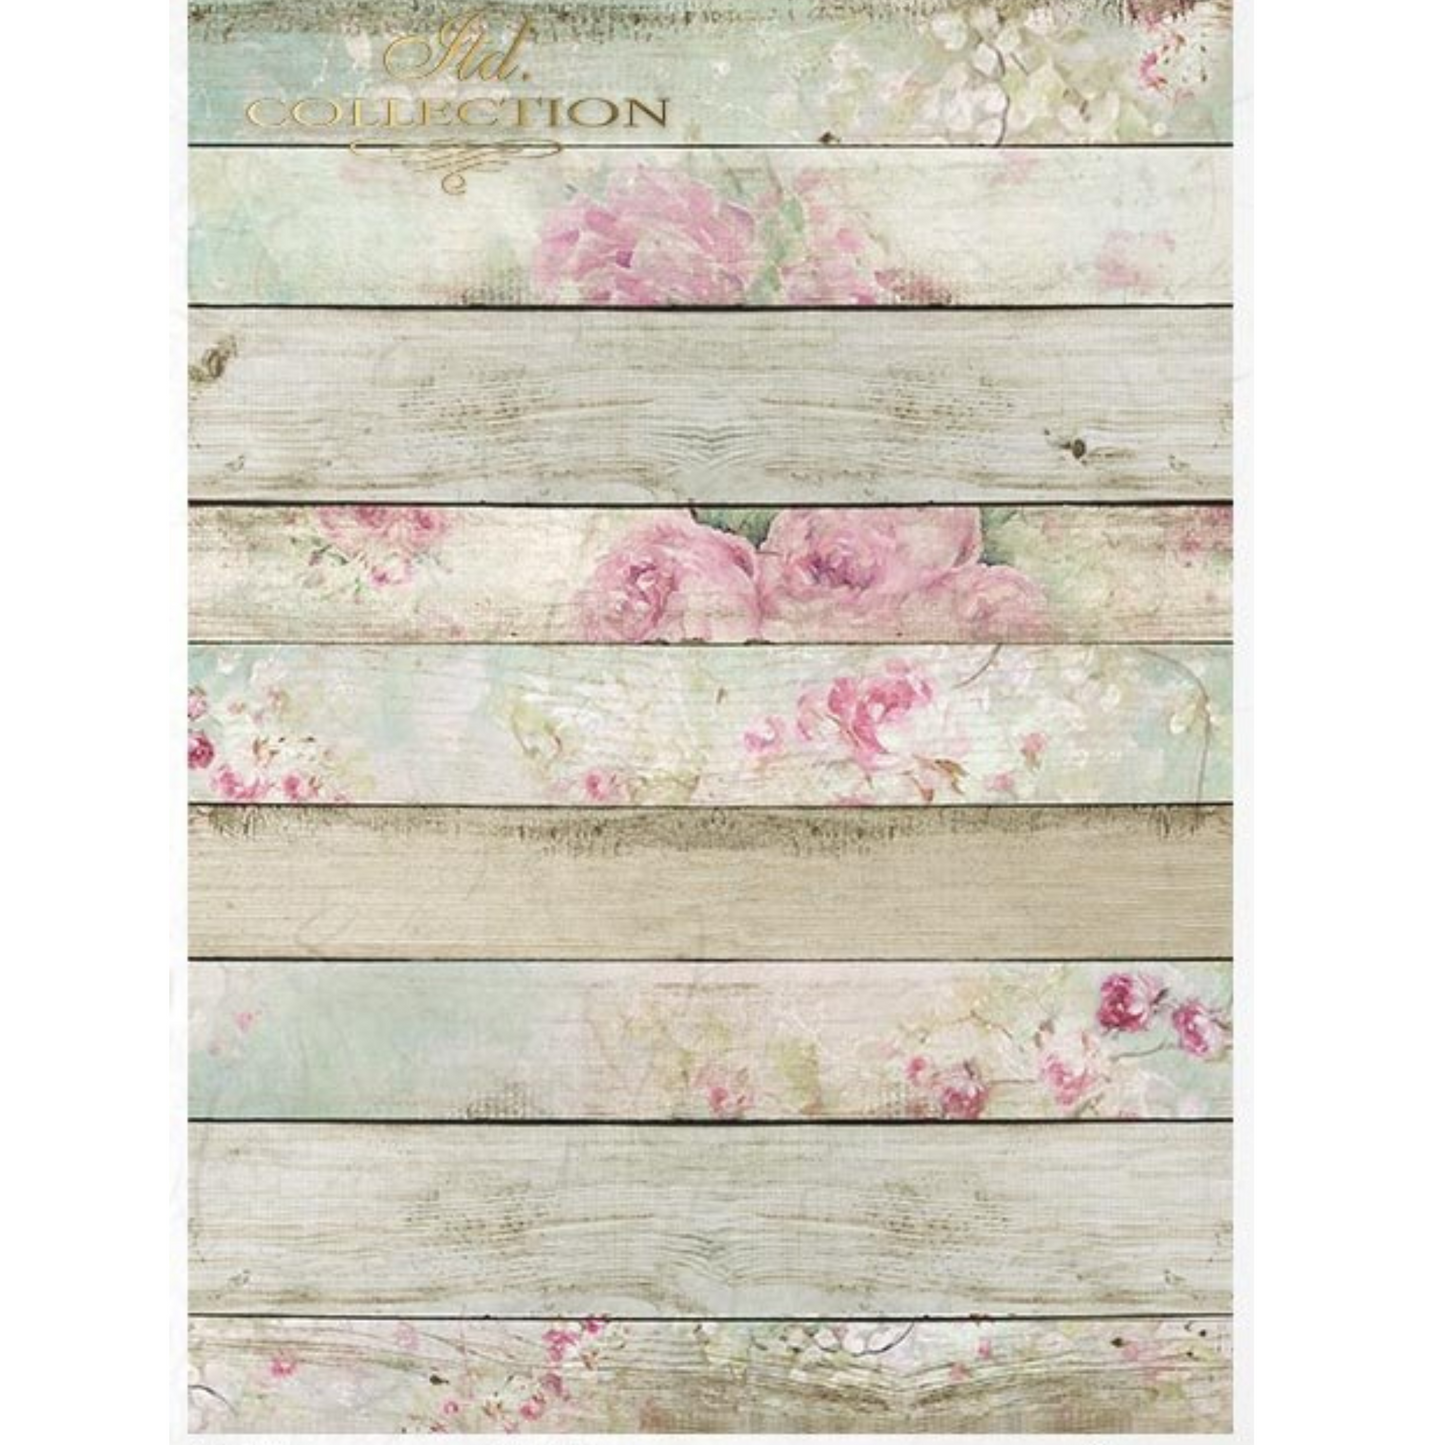 "Shabby Roses on Wood" decoupage rice paper by ITD Collection available at Milton's Duaghter.